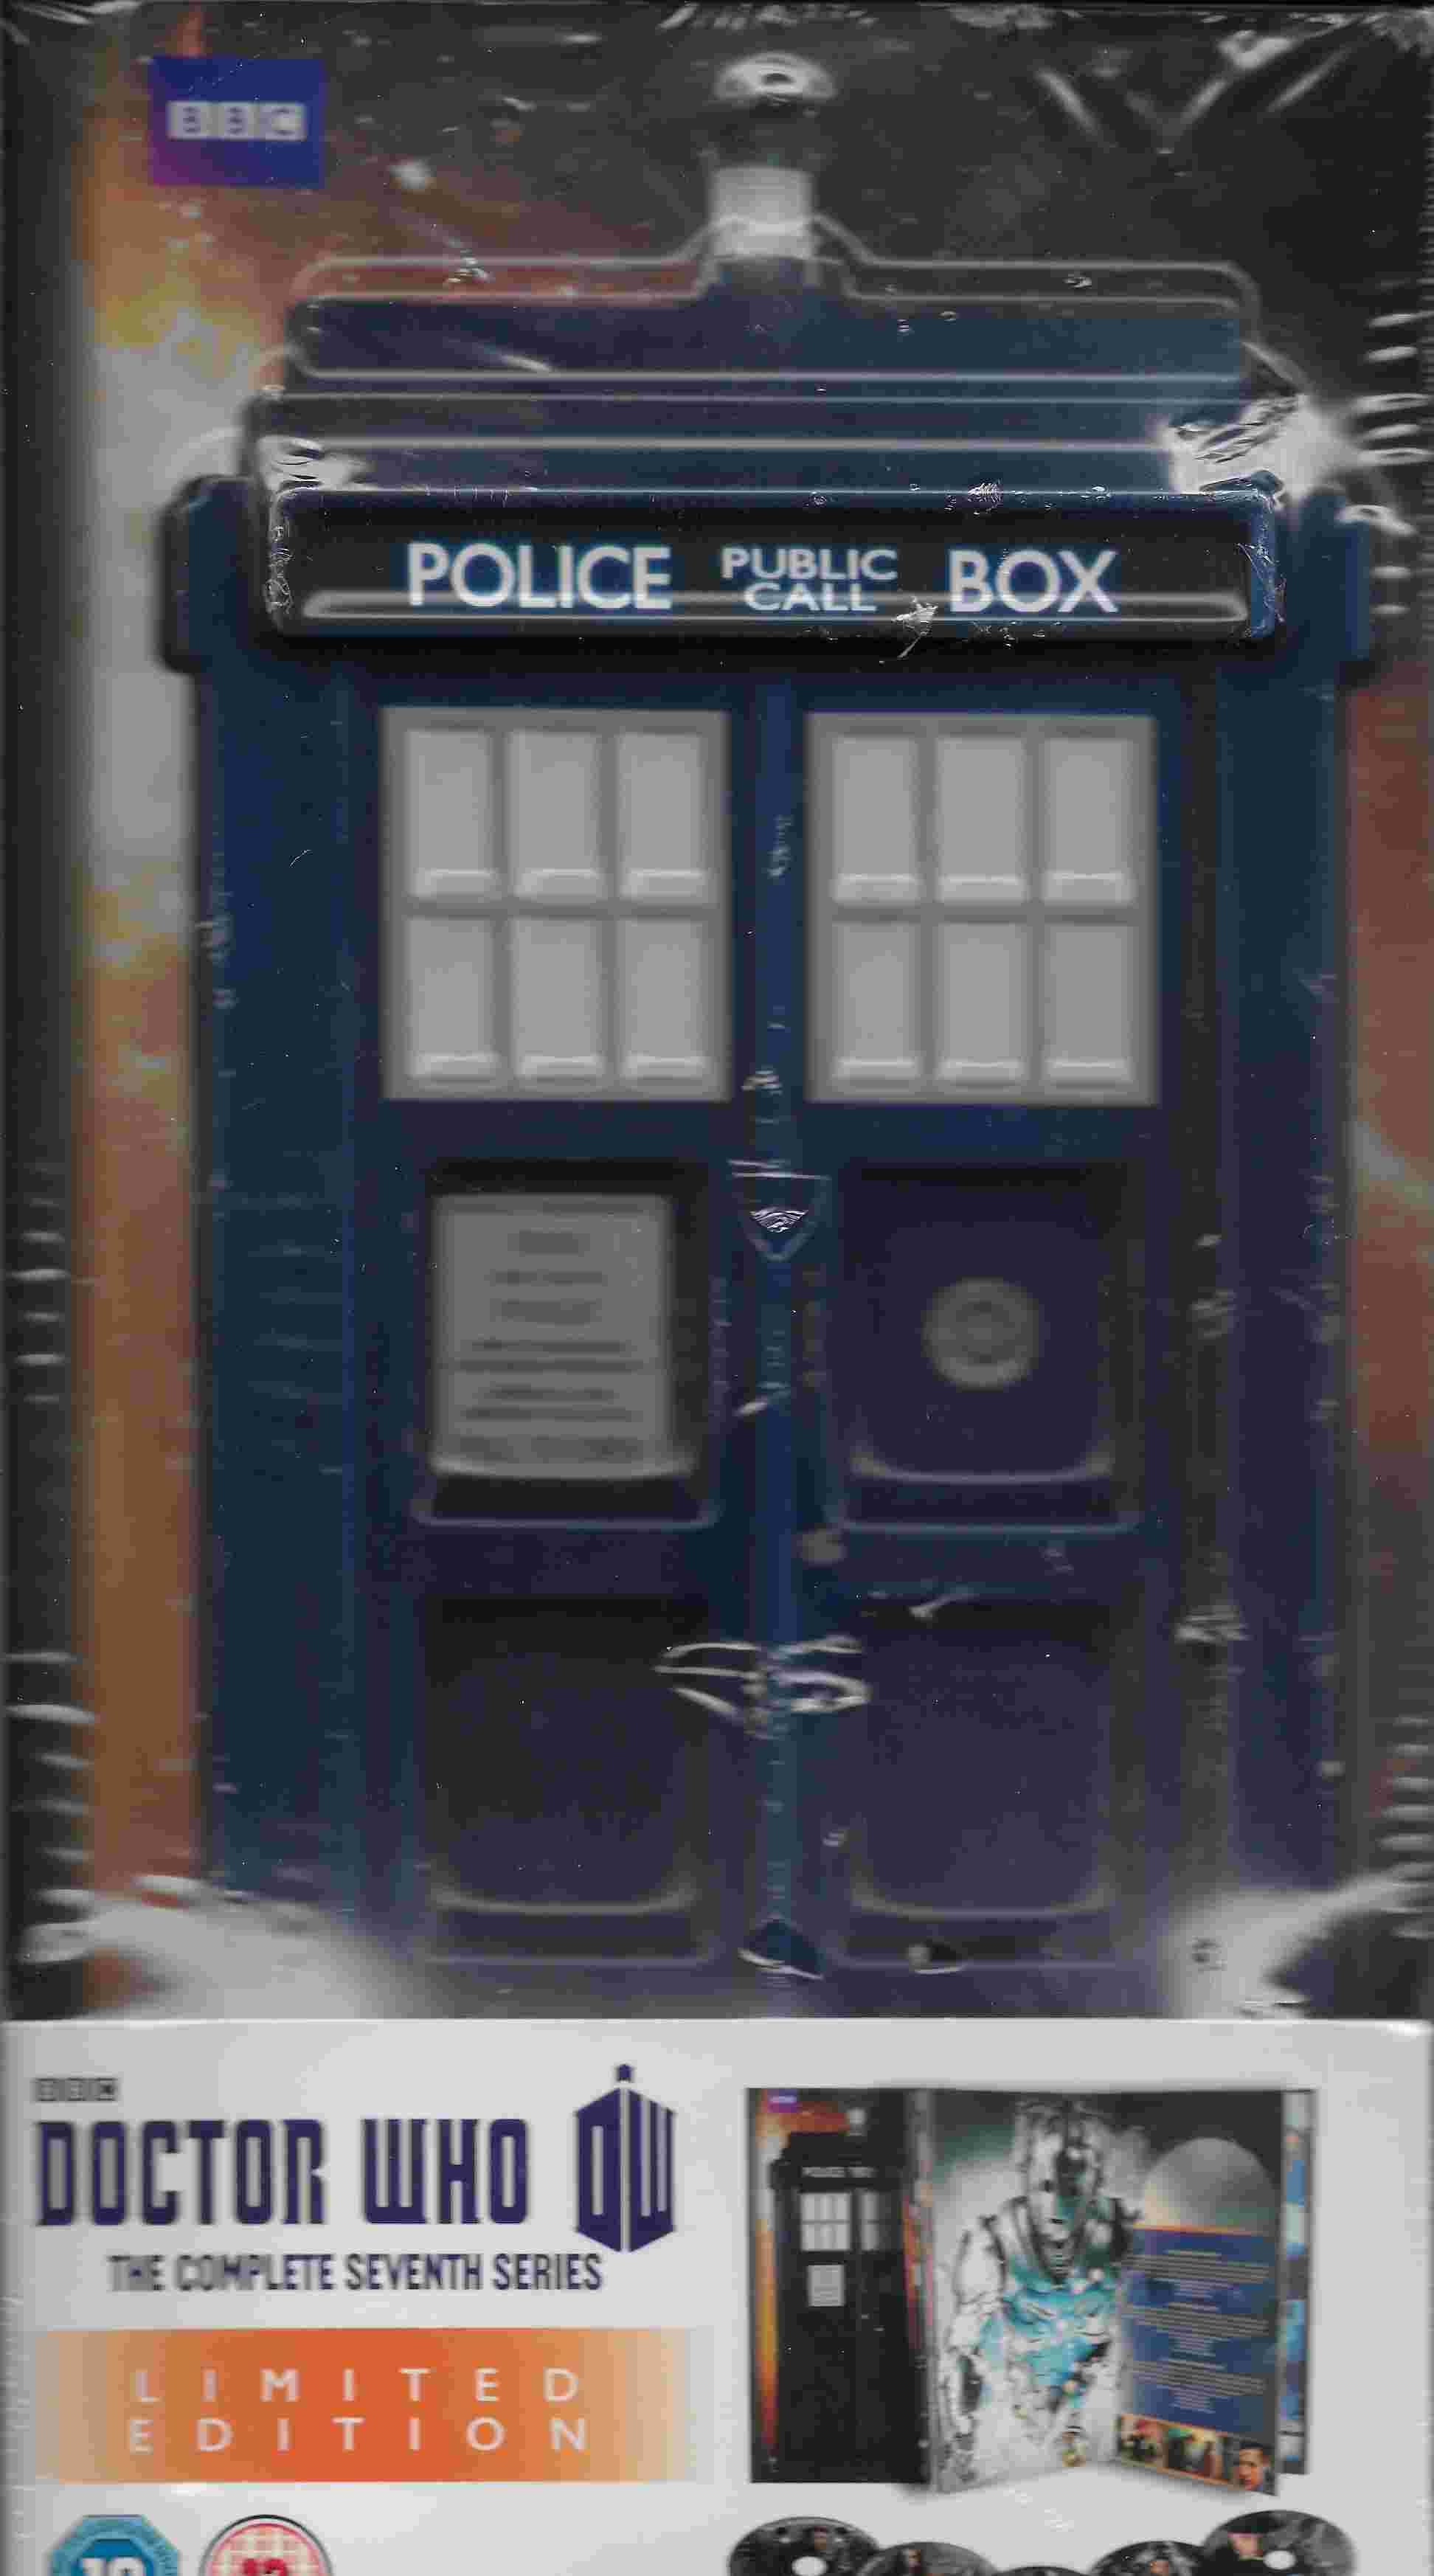 Picture of BBCBD 0251 Doctor Who - Series 7 boxed set (Limited BBC shop packaging) by artist Various from the BBC blu-rays - Records and Tapes library